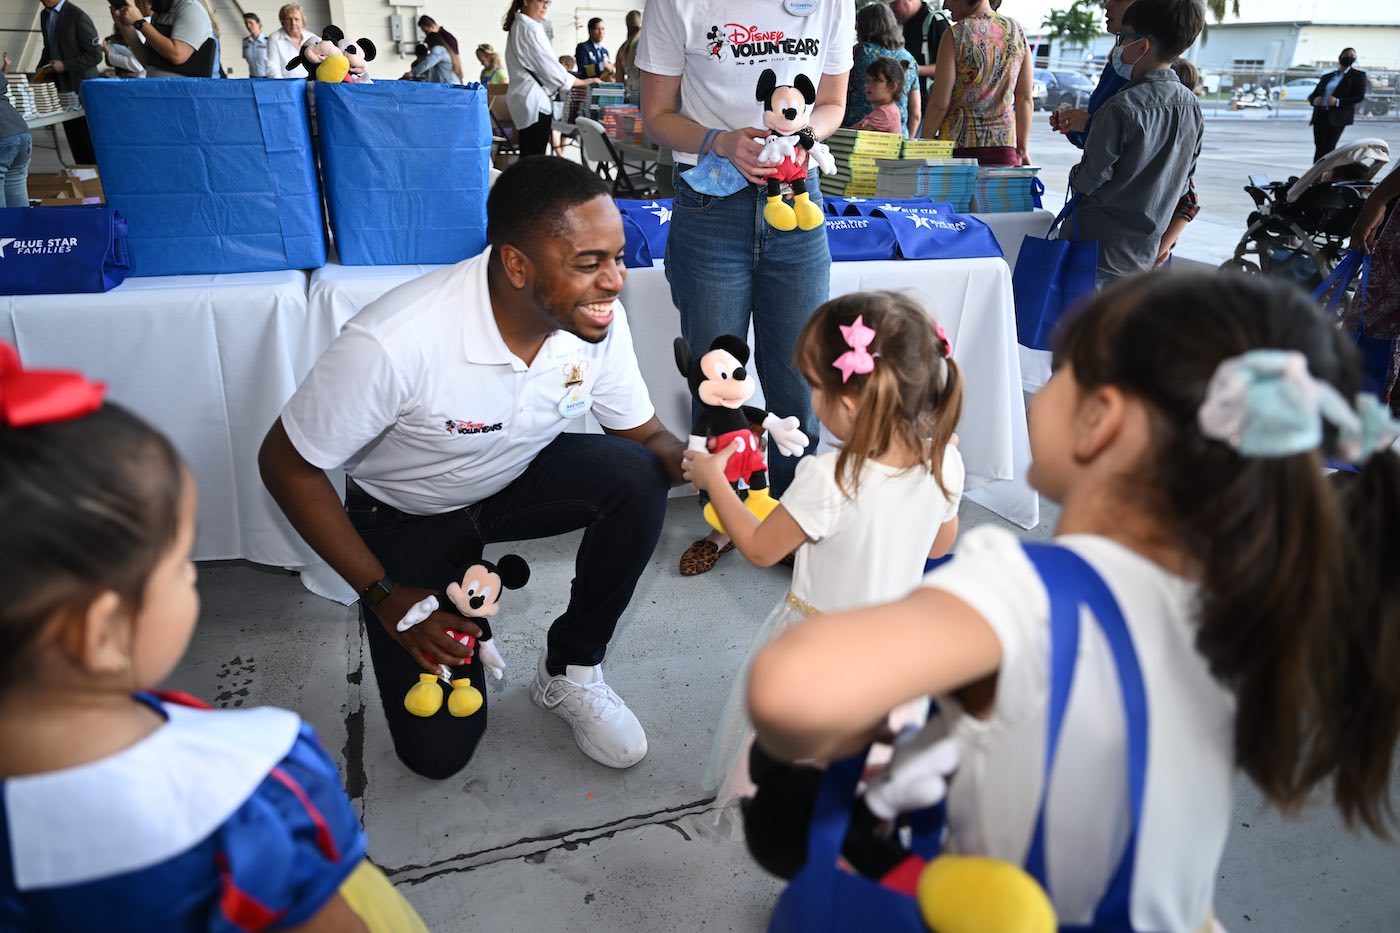 Disney VoluntEARS providing children with plush Mickey Mouse toys and books.